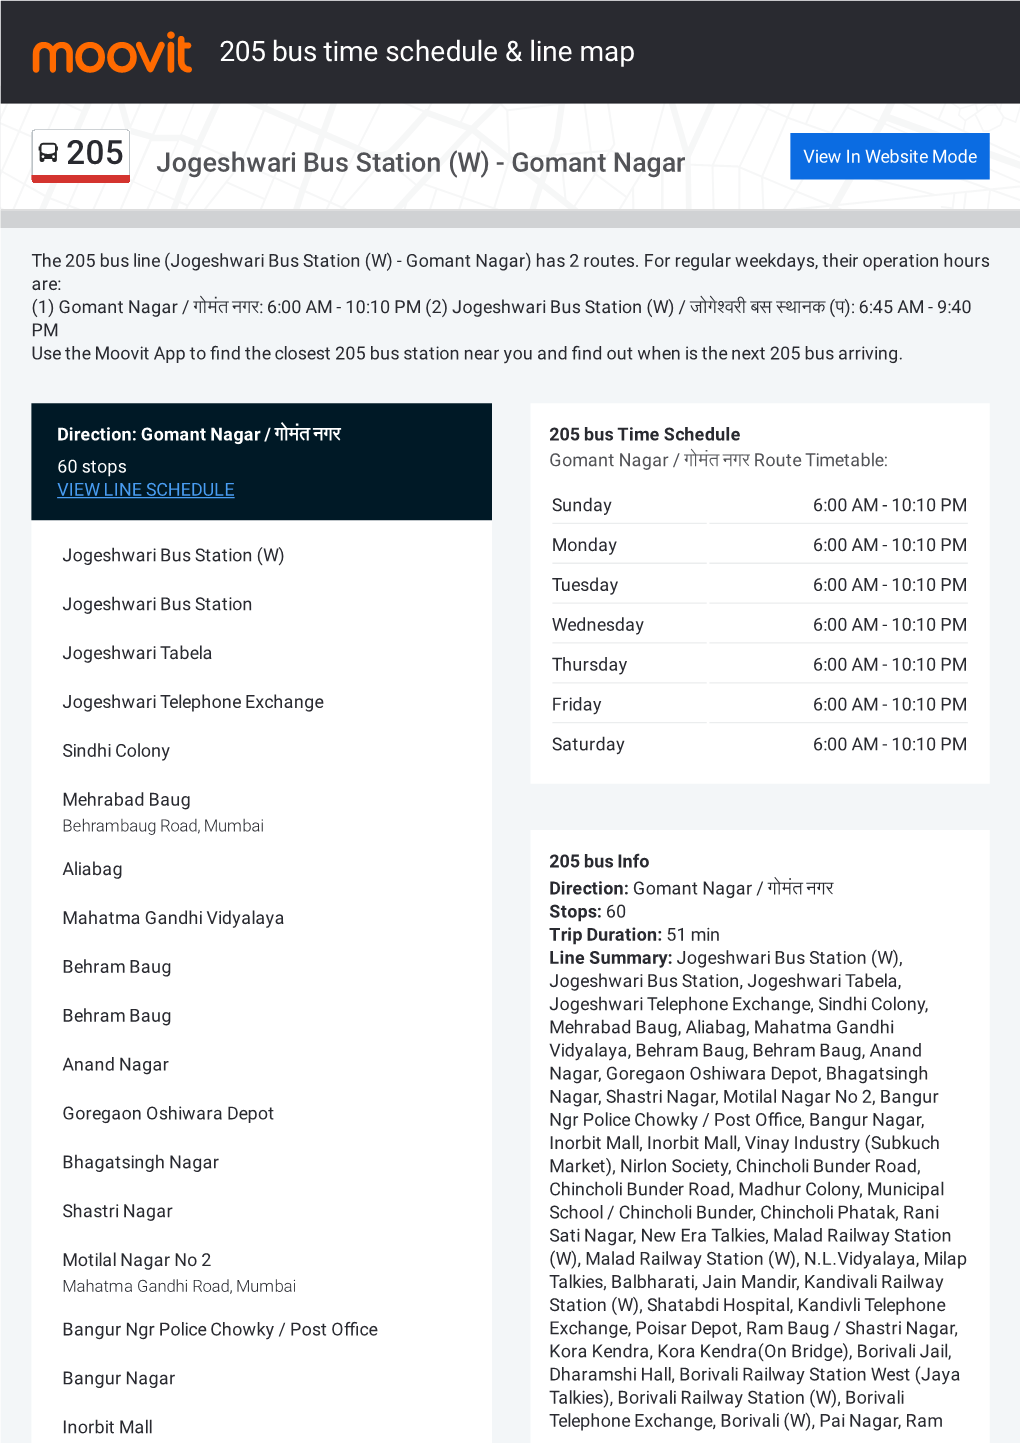 205 Bus Time Schedule & Line Route